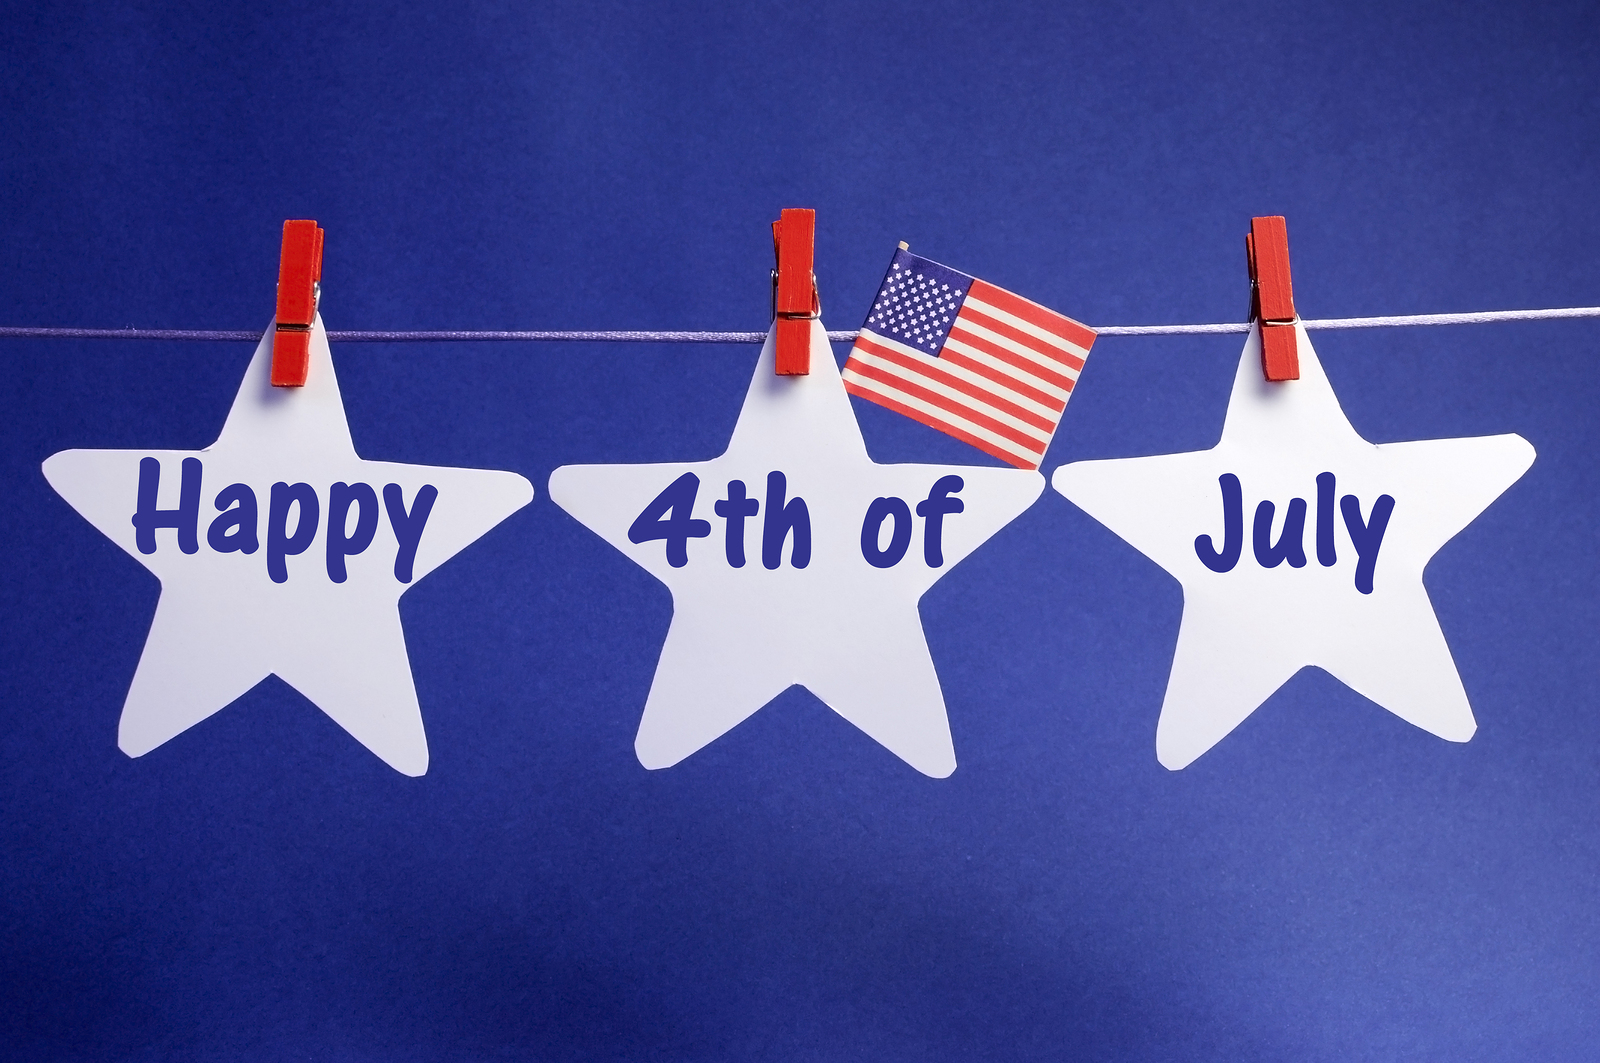 Happy 4th of July Picture 2021 of July Picture, Wallpaper, Photo, HD Pics For Whatsapp Status DP